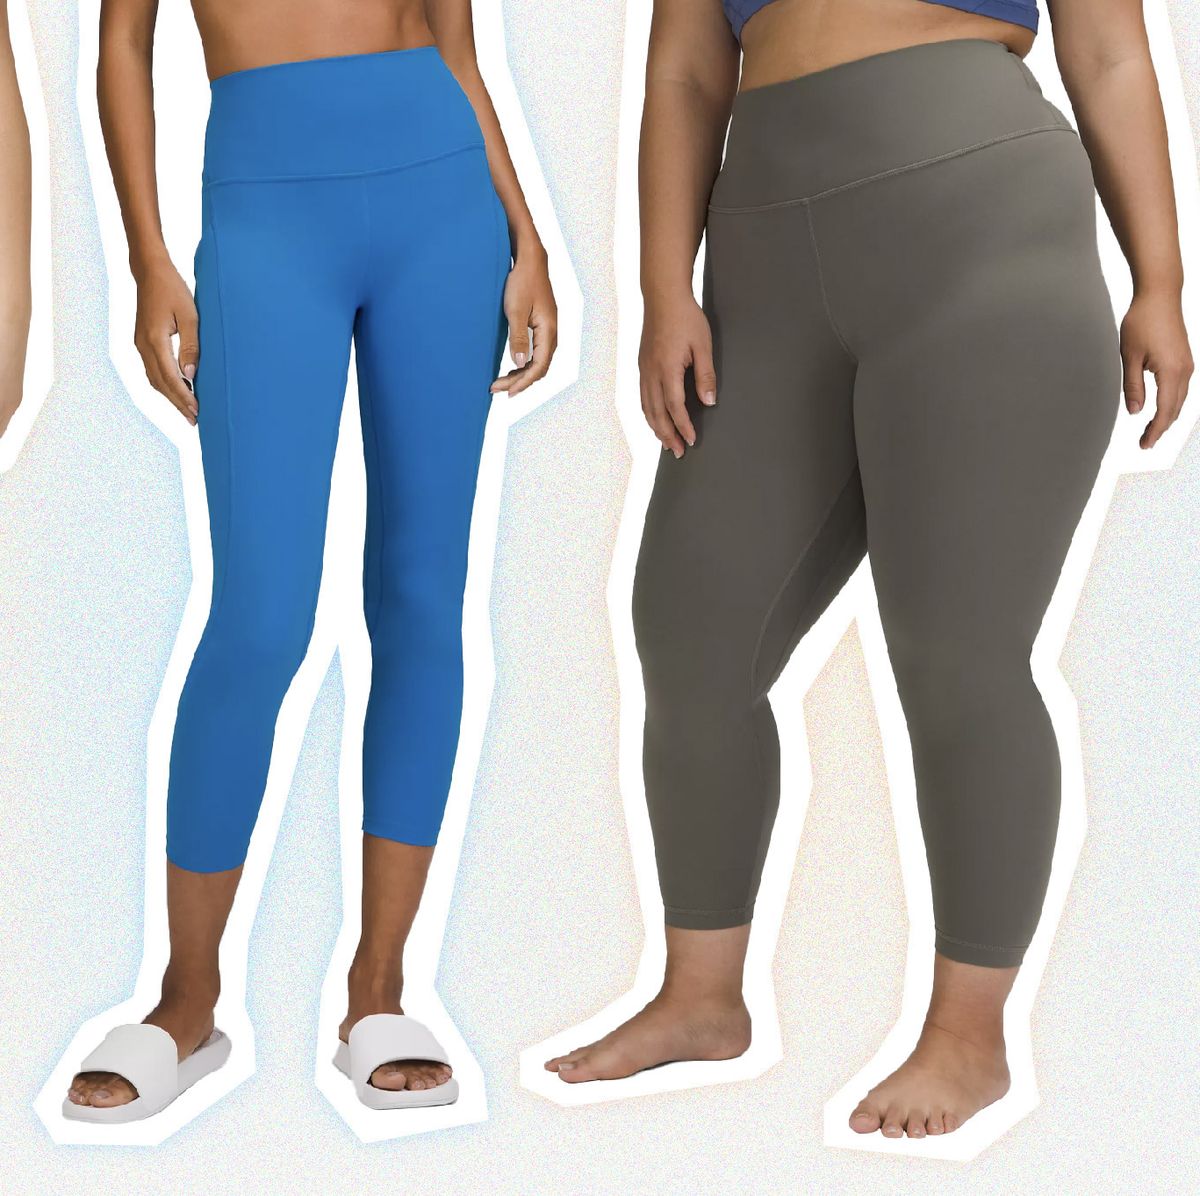 Lululemon Align Leggings Are Discounted—But Not for Long